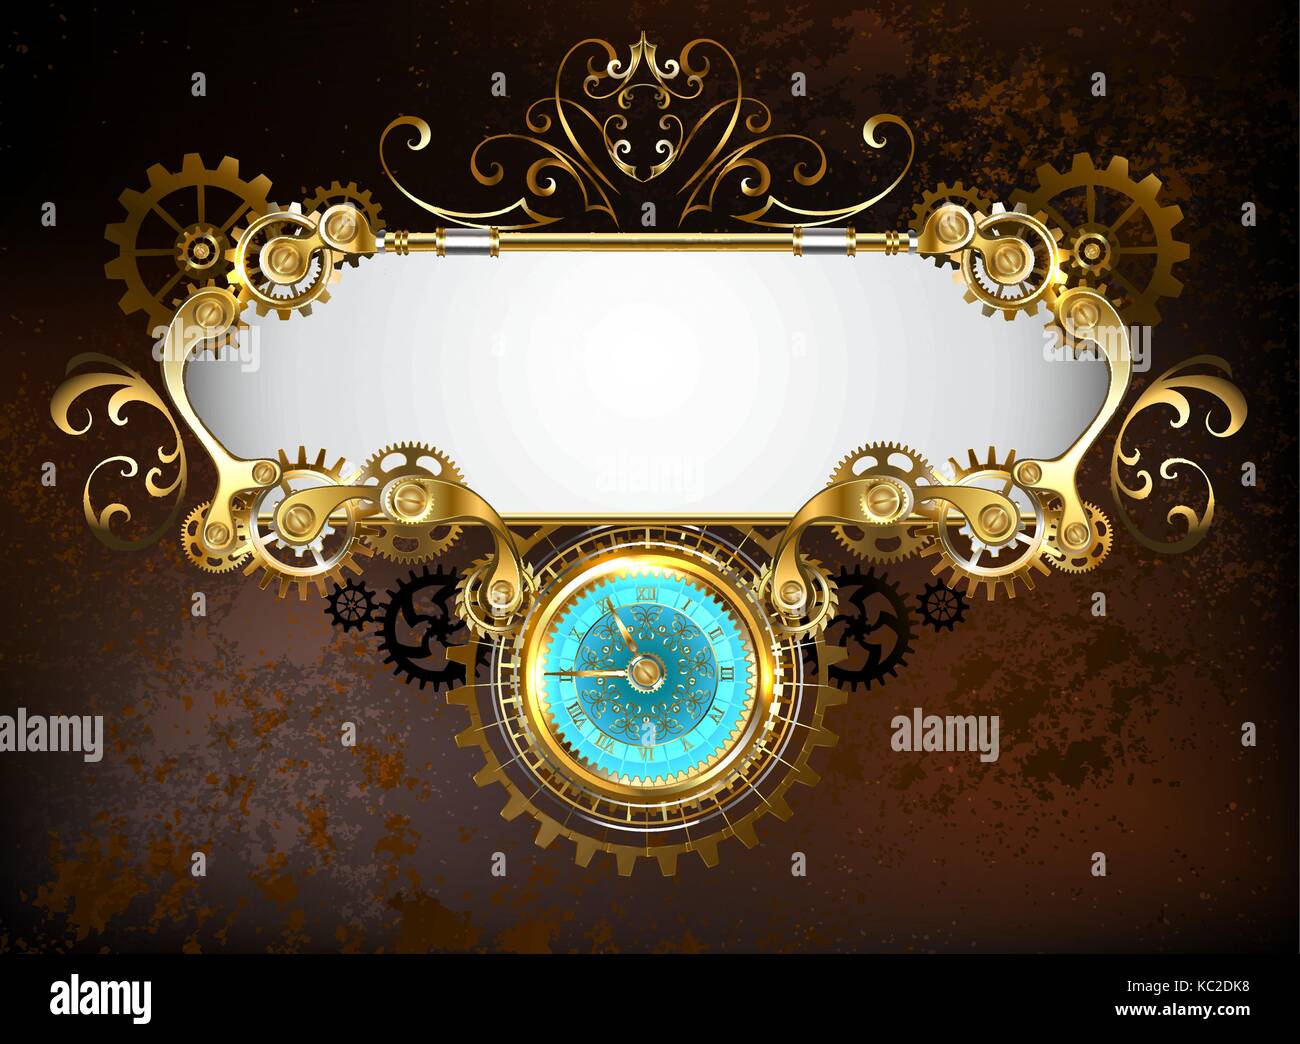 Mechanical banner with an antique clock, decorated with gold and brass gears on a brown rusty background. Steampunk style. Stock Vector